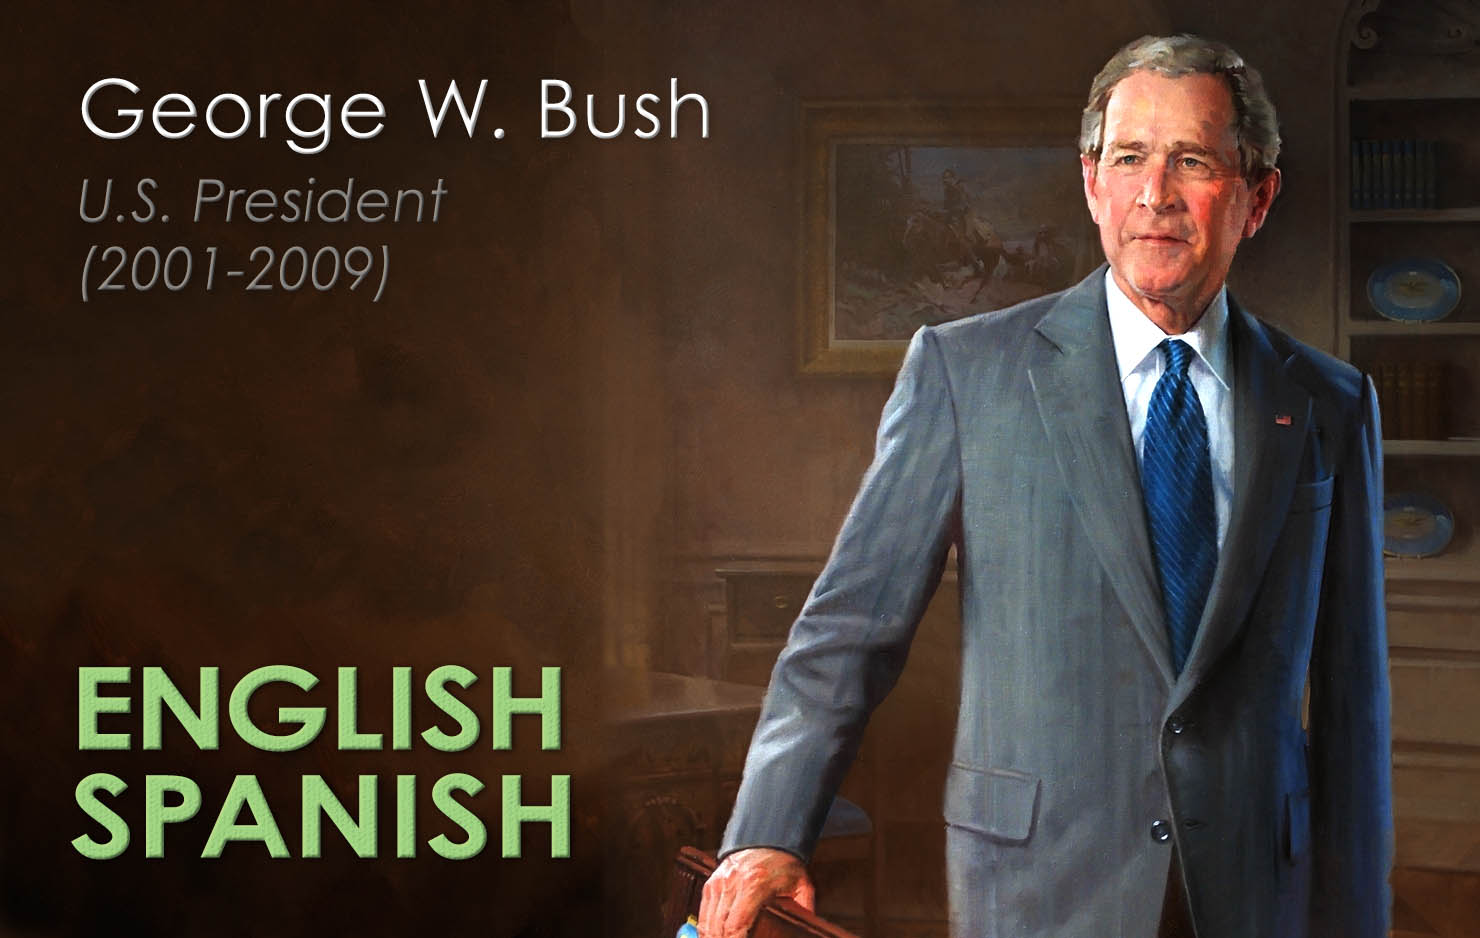 George W. Bush was the first president to deliver the Weekly Radio Address of the President of the United States in both English and Spanish.